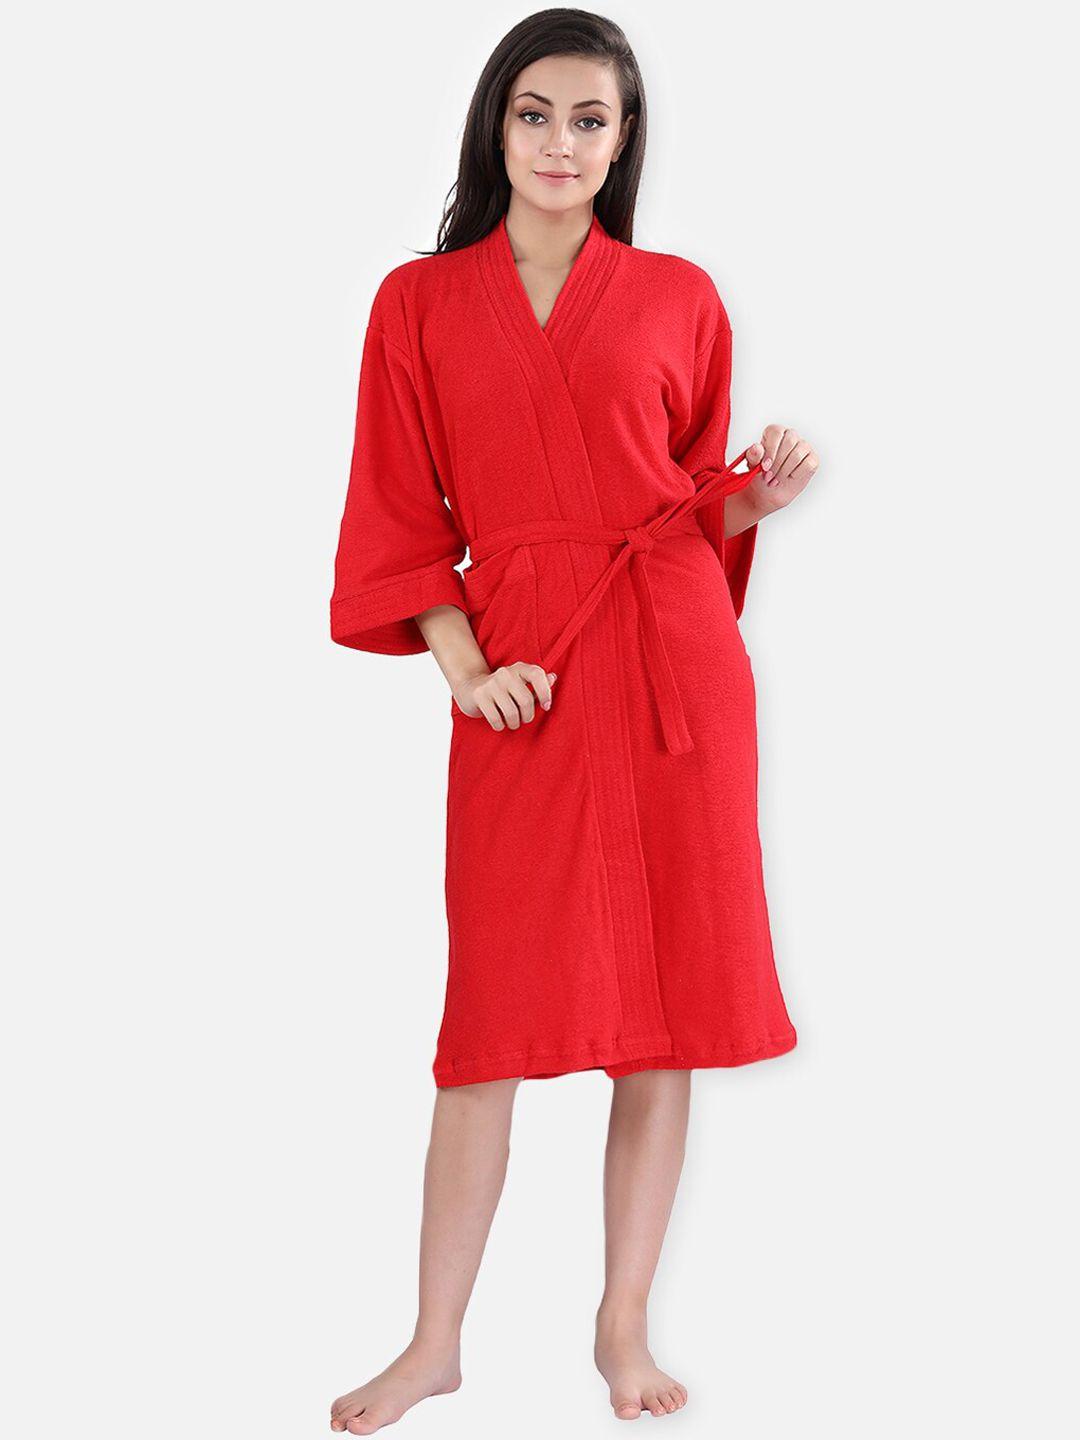 lacylook women red solid bath robe with belt